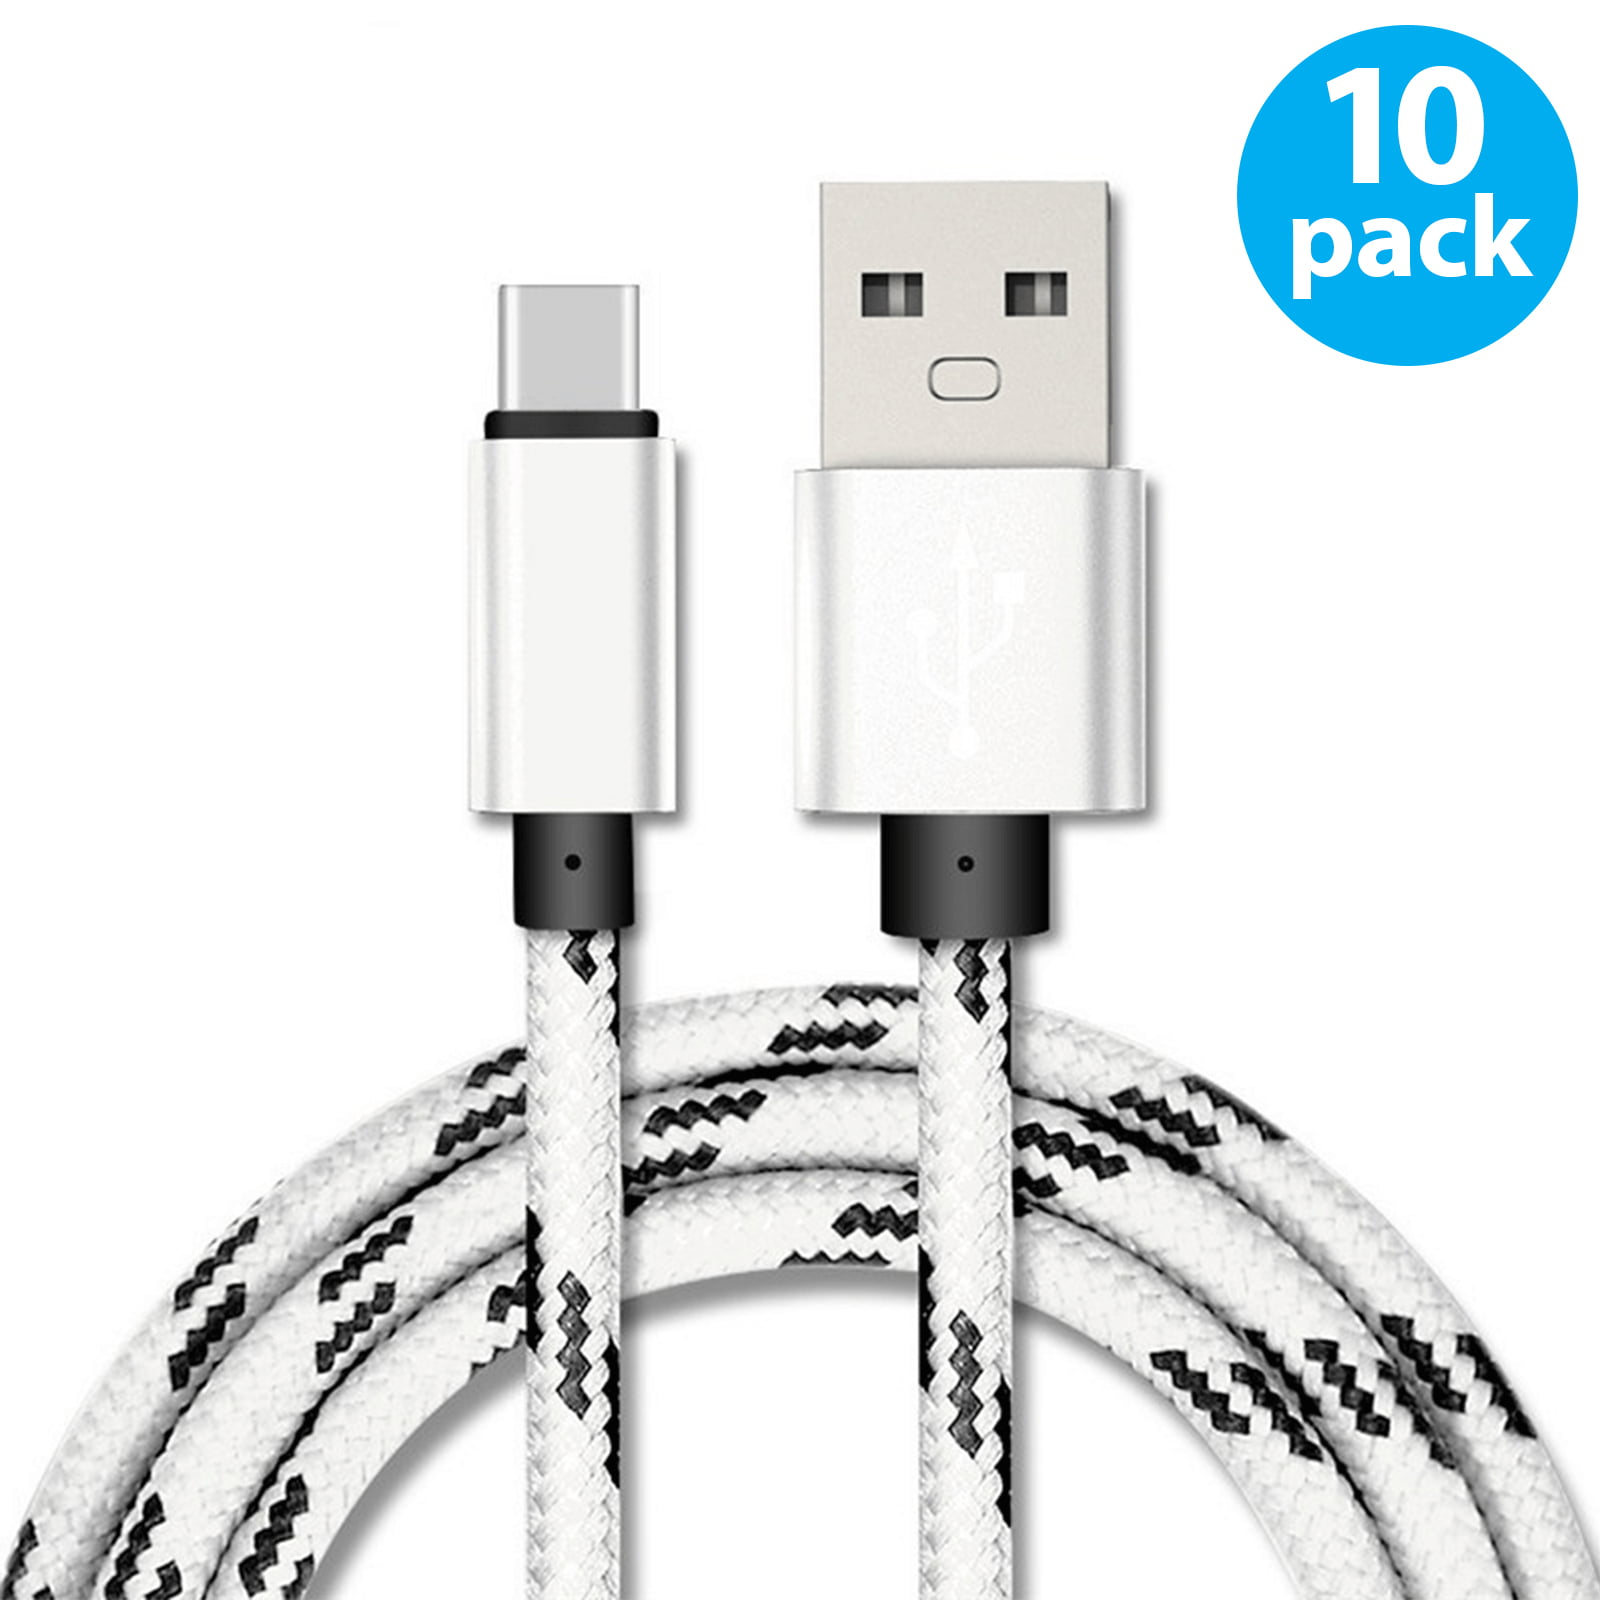 3Pack,10ft+10ft+10ft USB Type C Cable 3.1A Fast Charging ,Sweguard USB-A to USB-C Charger Nylon Braided Cord for Samsung Galaxy S20/S10/S9/S8 Plus/Note 10/9/8 A10/A20/A51,LG V50 V40 G8,Moto Z-Grey 